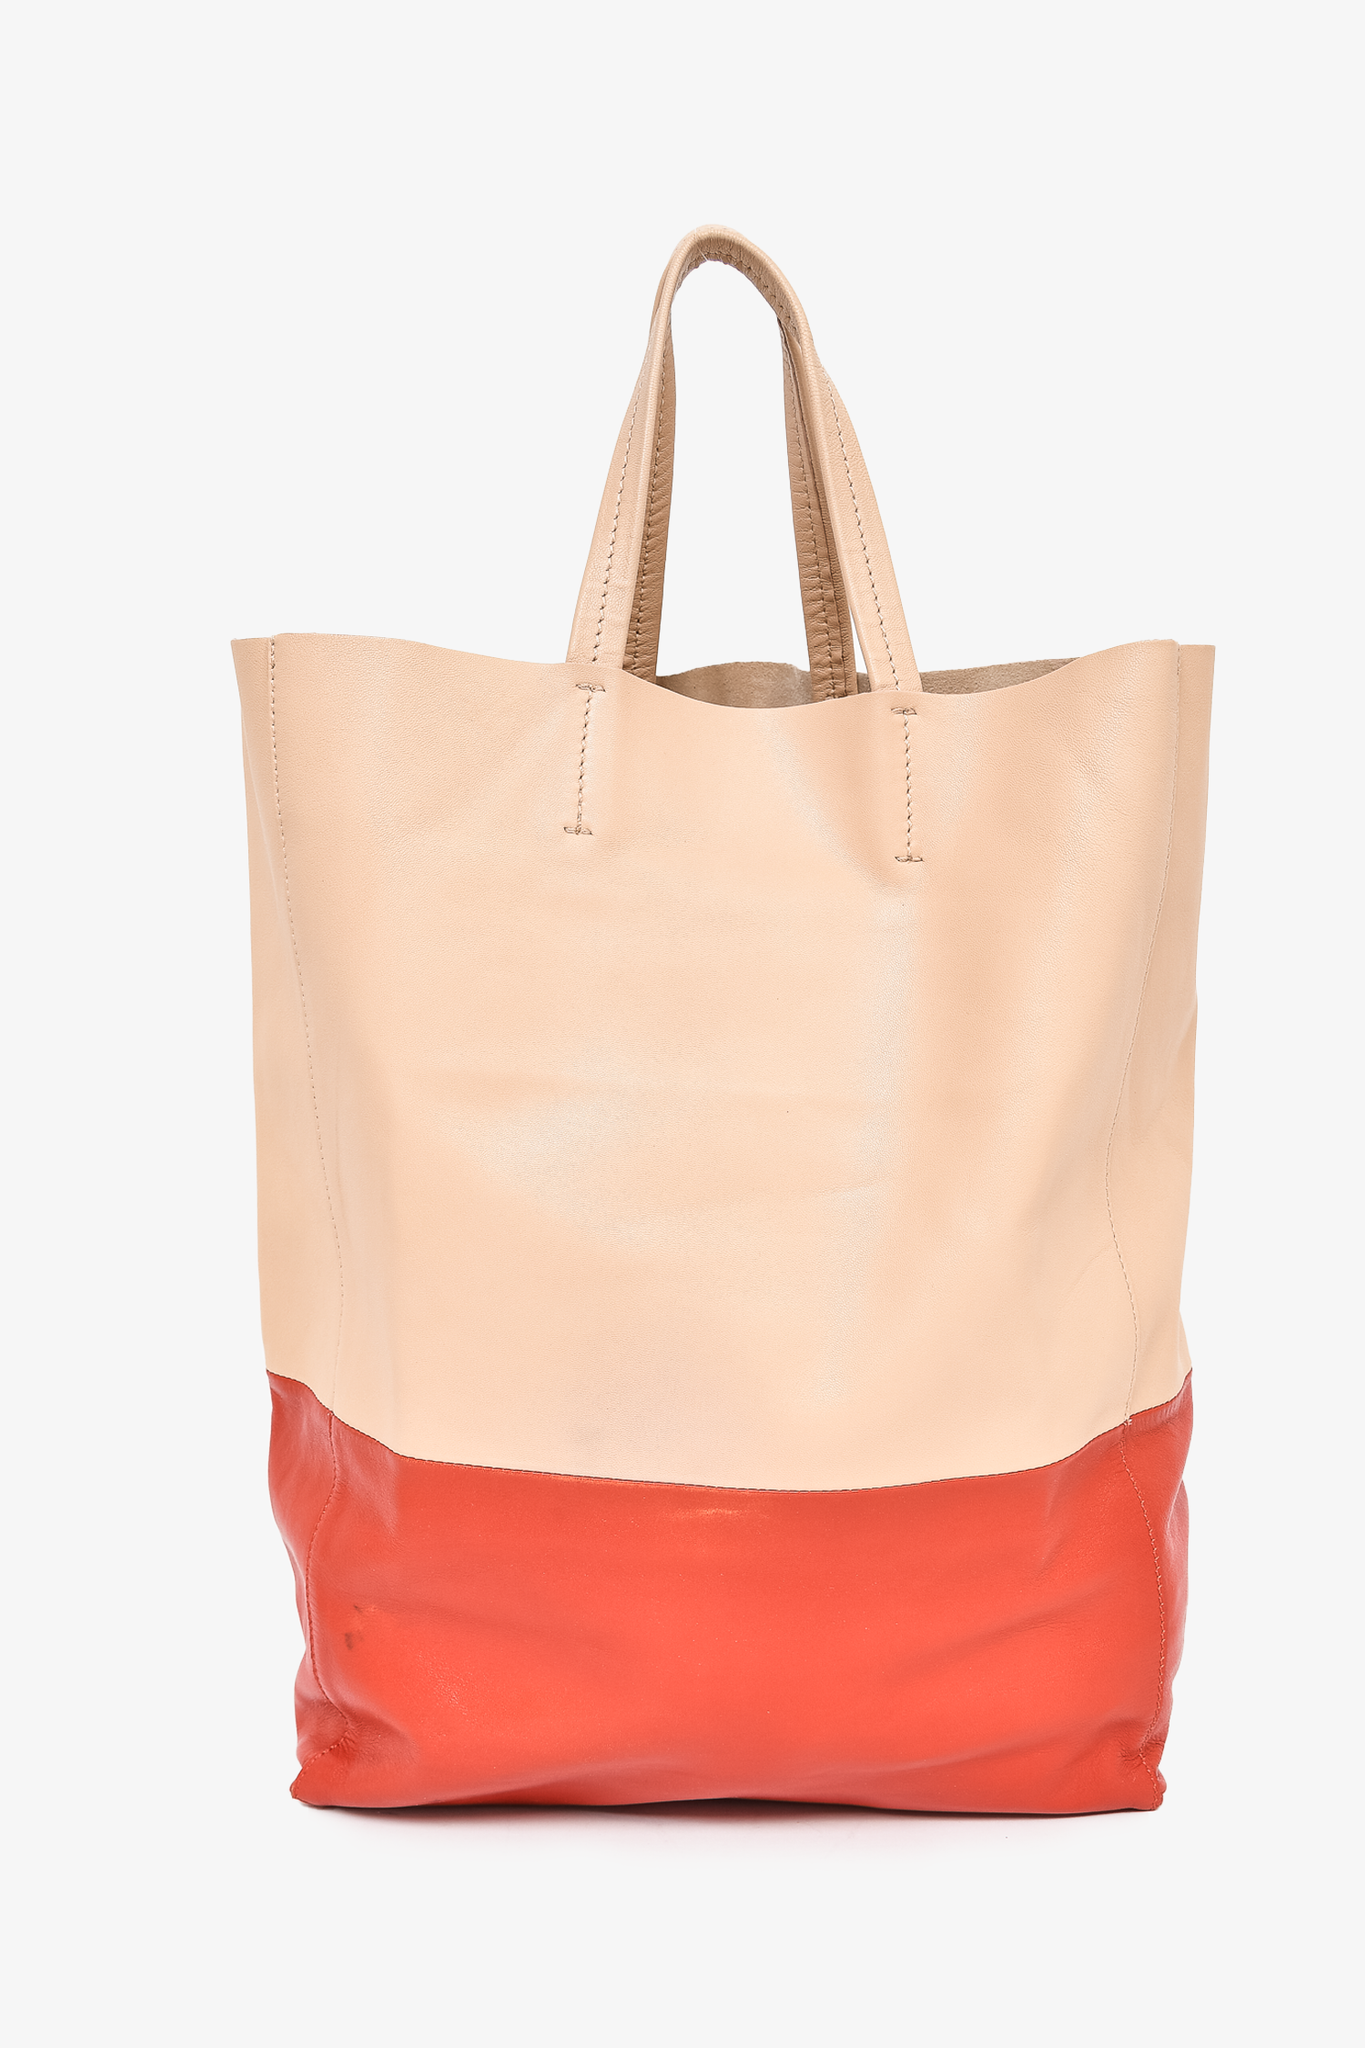 Celine Beige/Red Leather Vertical Cabas Tote (As Is)